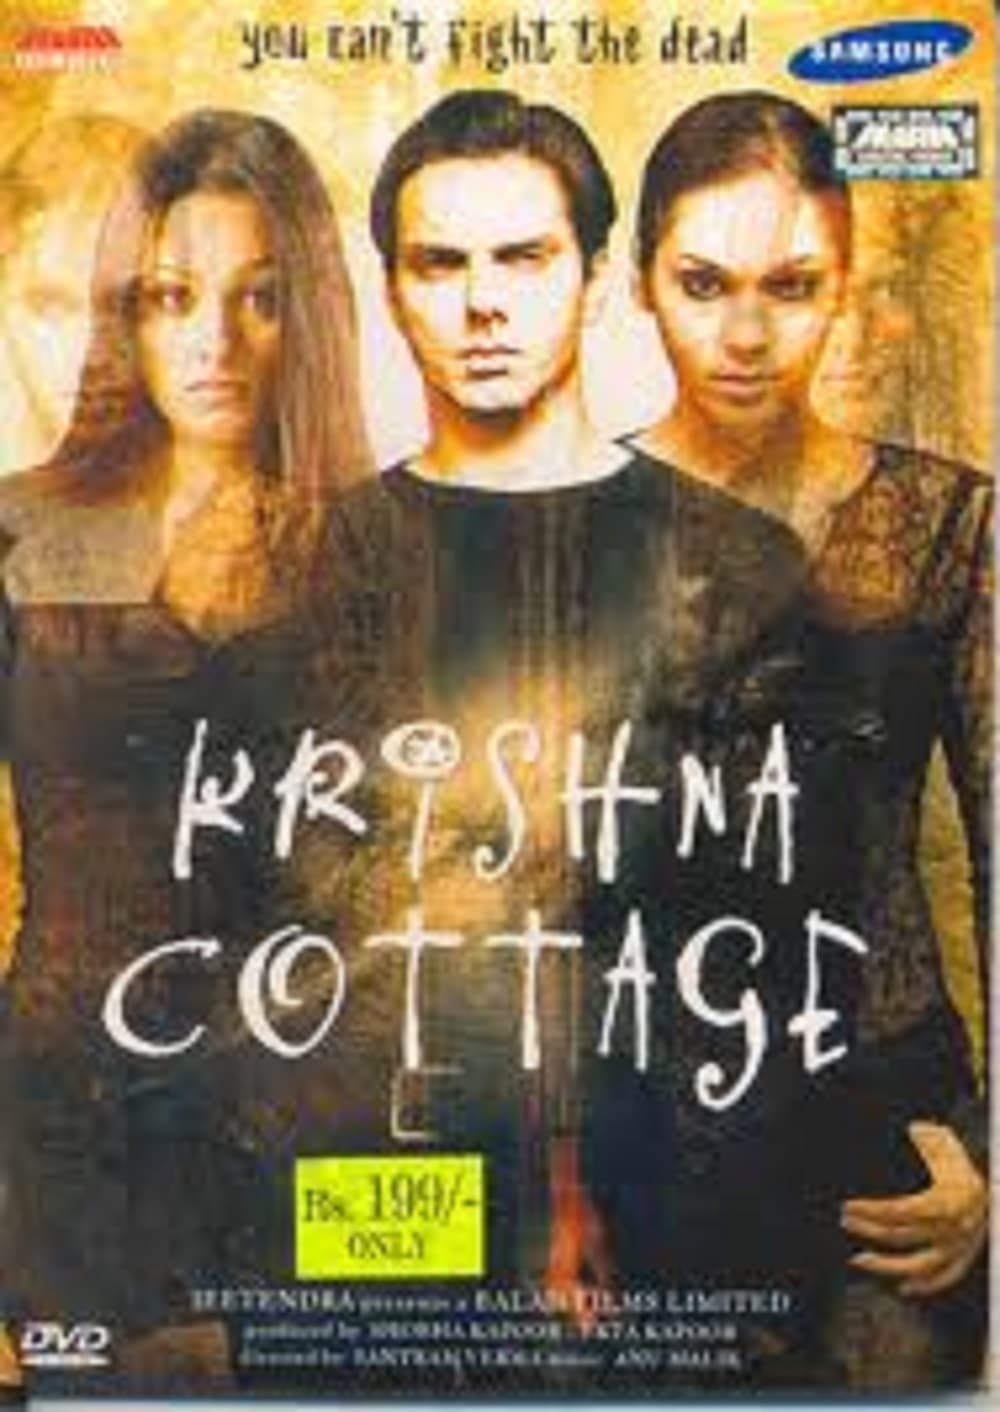 Poster for the movie "Krishna Cottage"